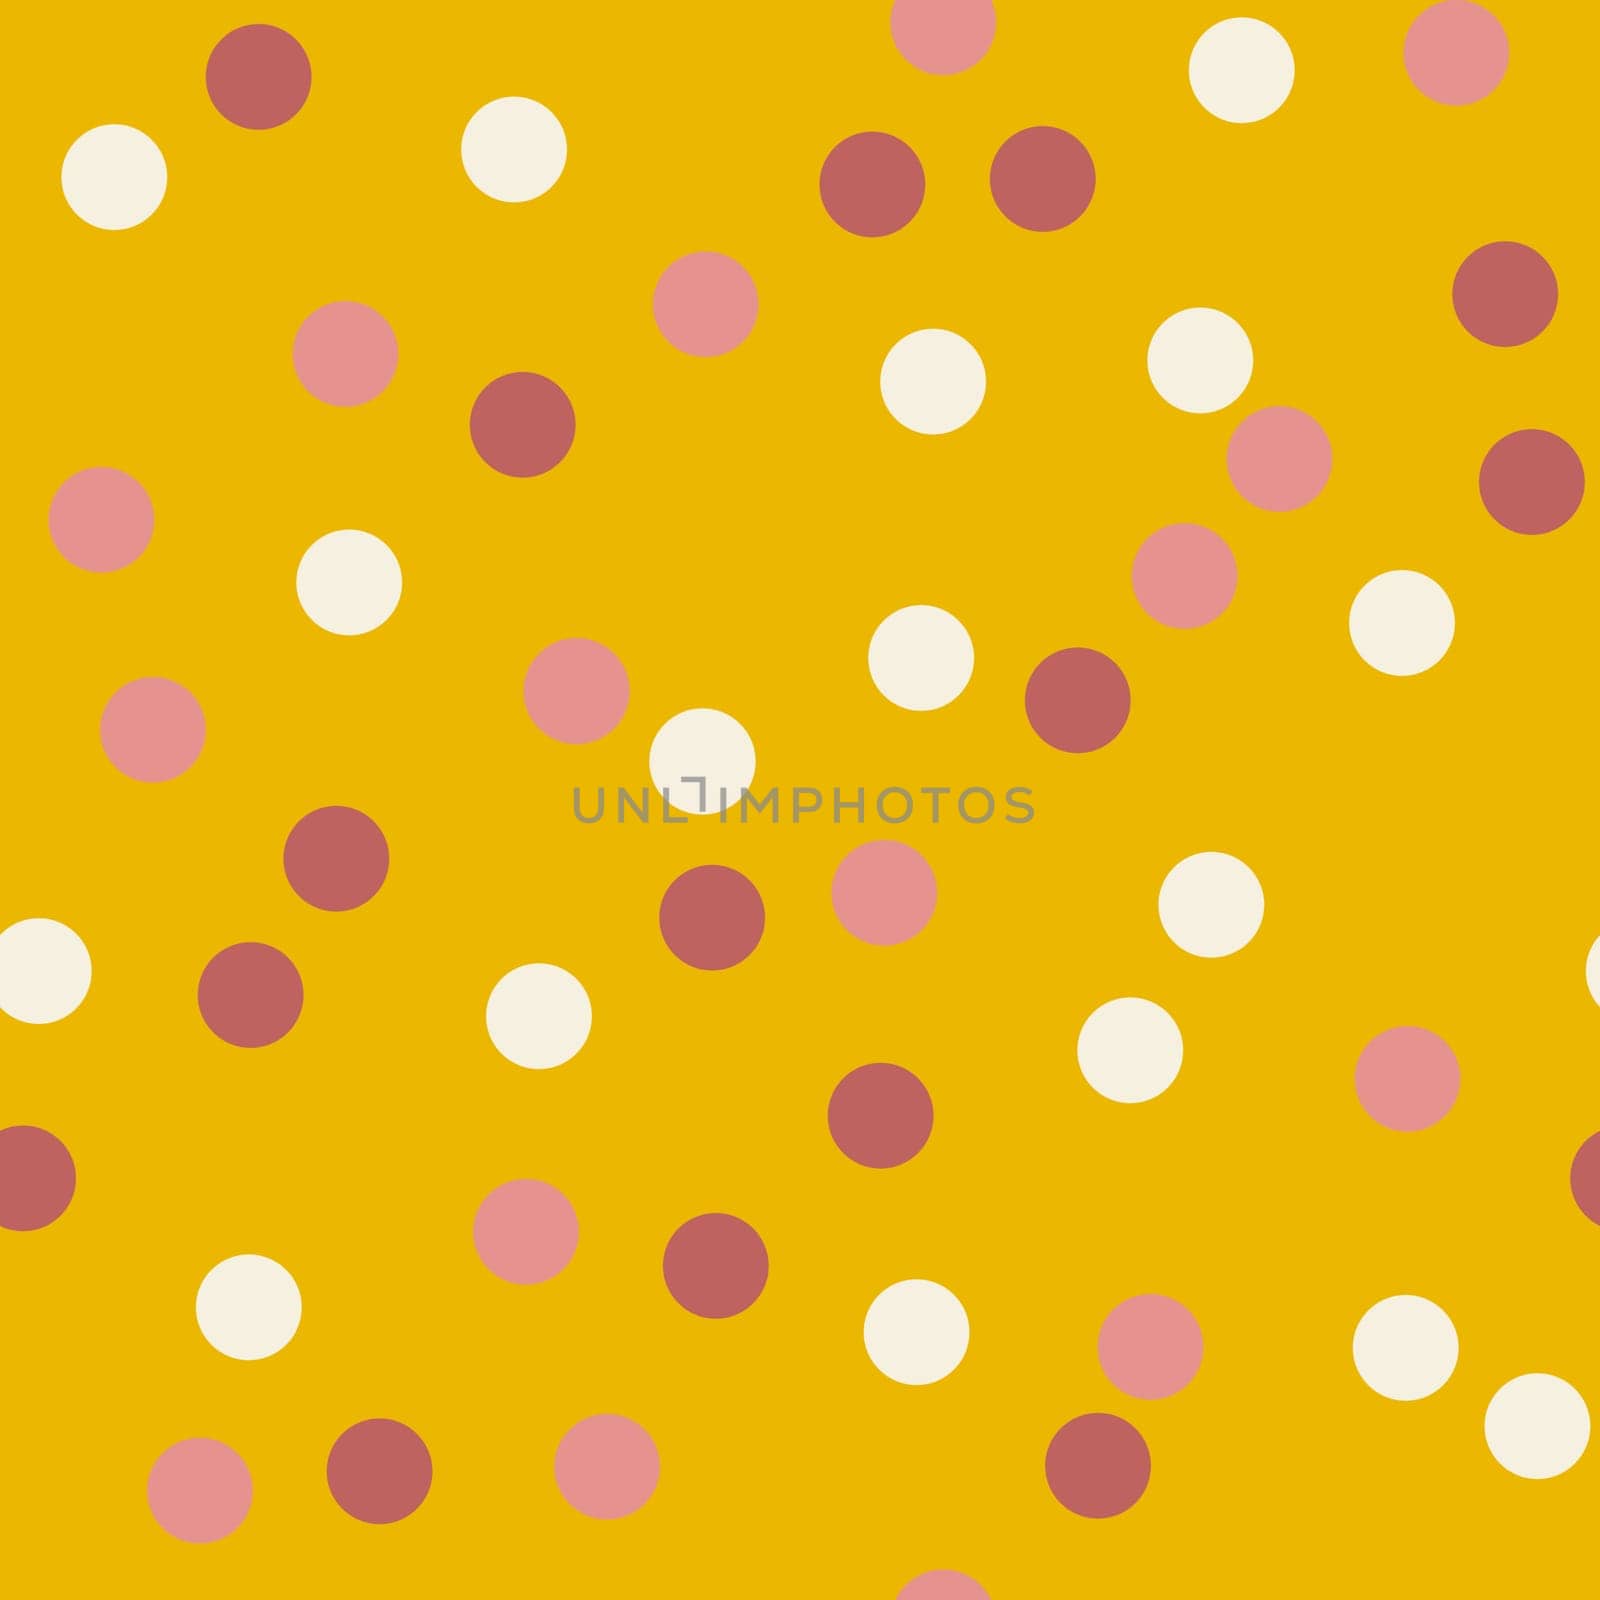 Hand drawn seamless pattern with beige marsala geometric circles on vintage yellow. Large abstract polka dot round shapes, minimalist mid century modern style, neutral retro vintage style, fashion fabric wrapping